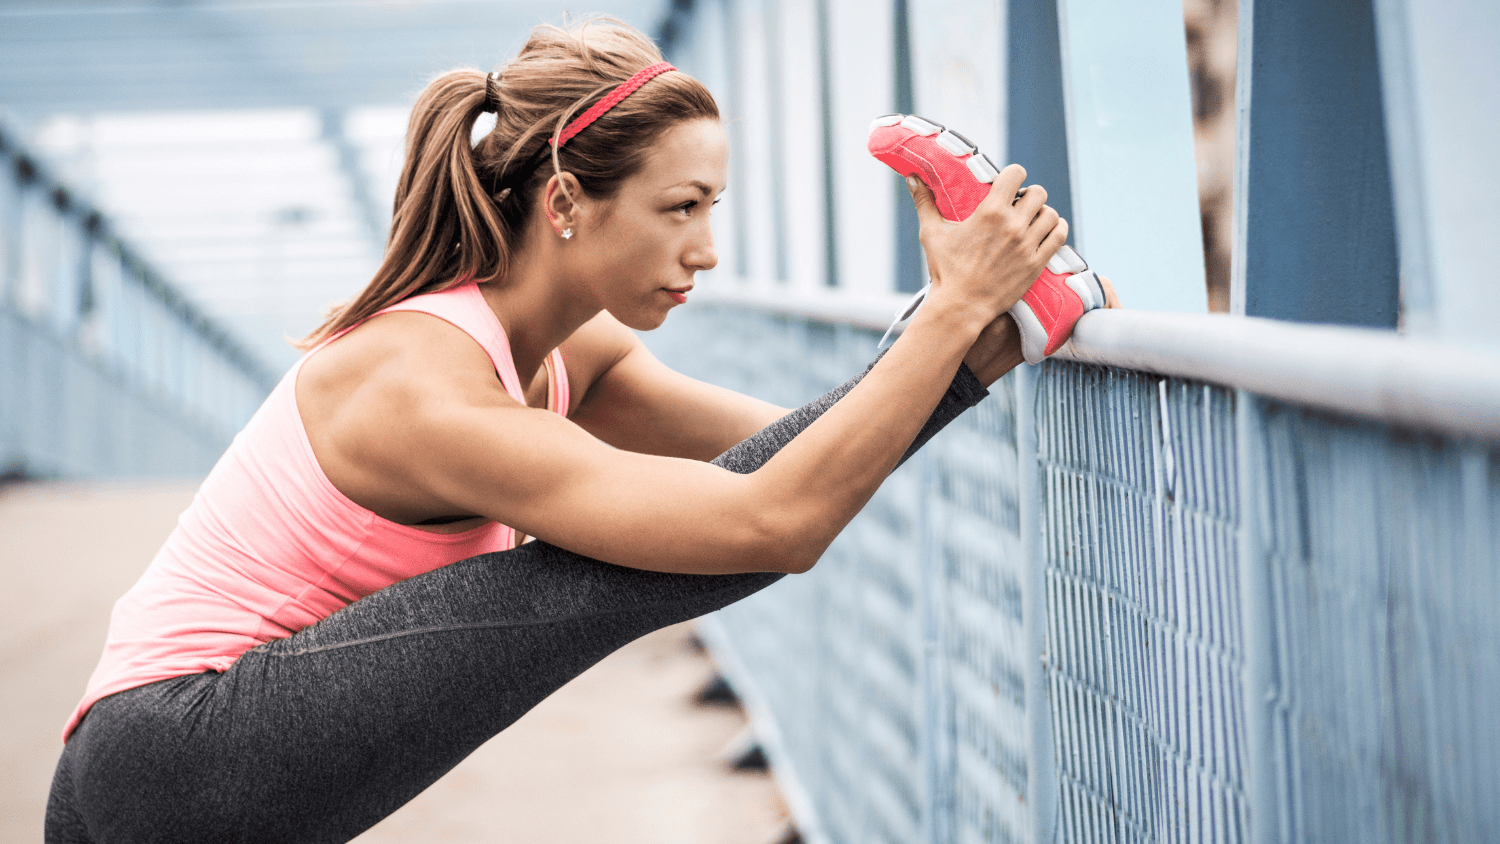 How to Stretch for a Cardio Workout